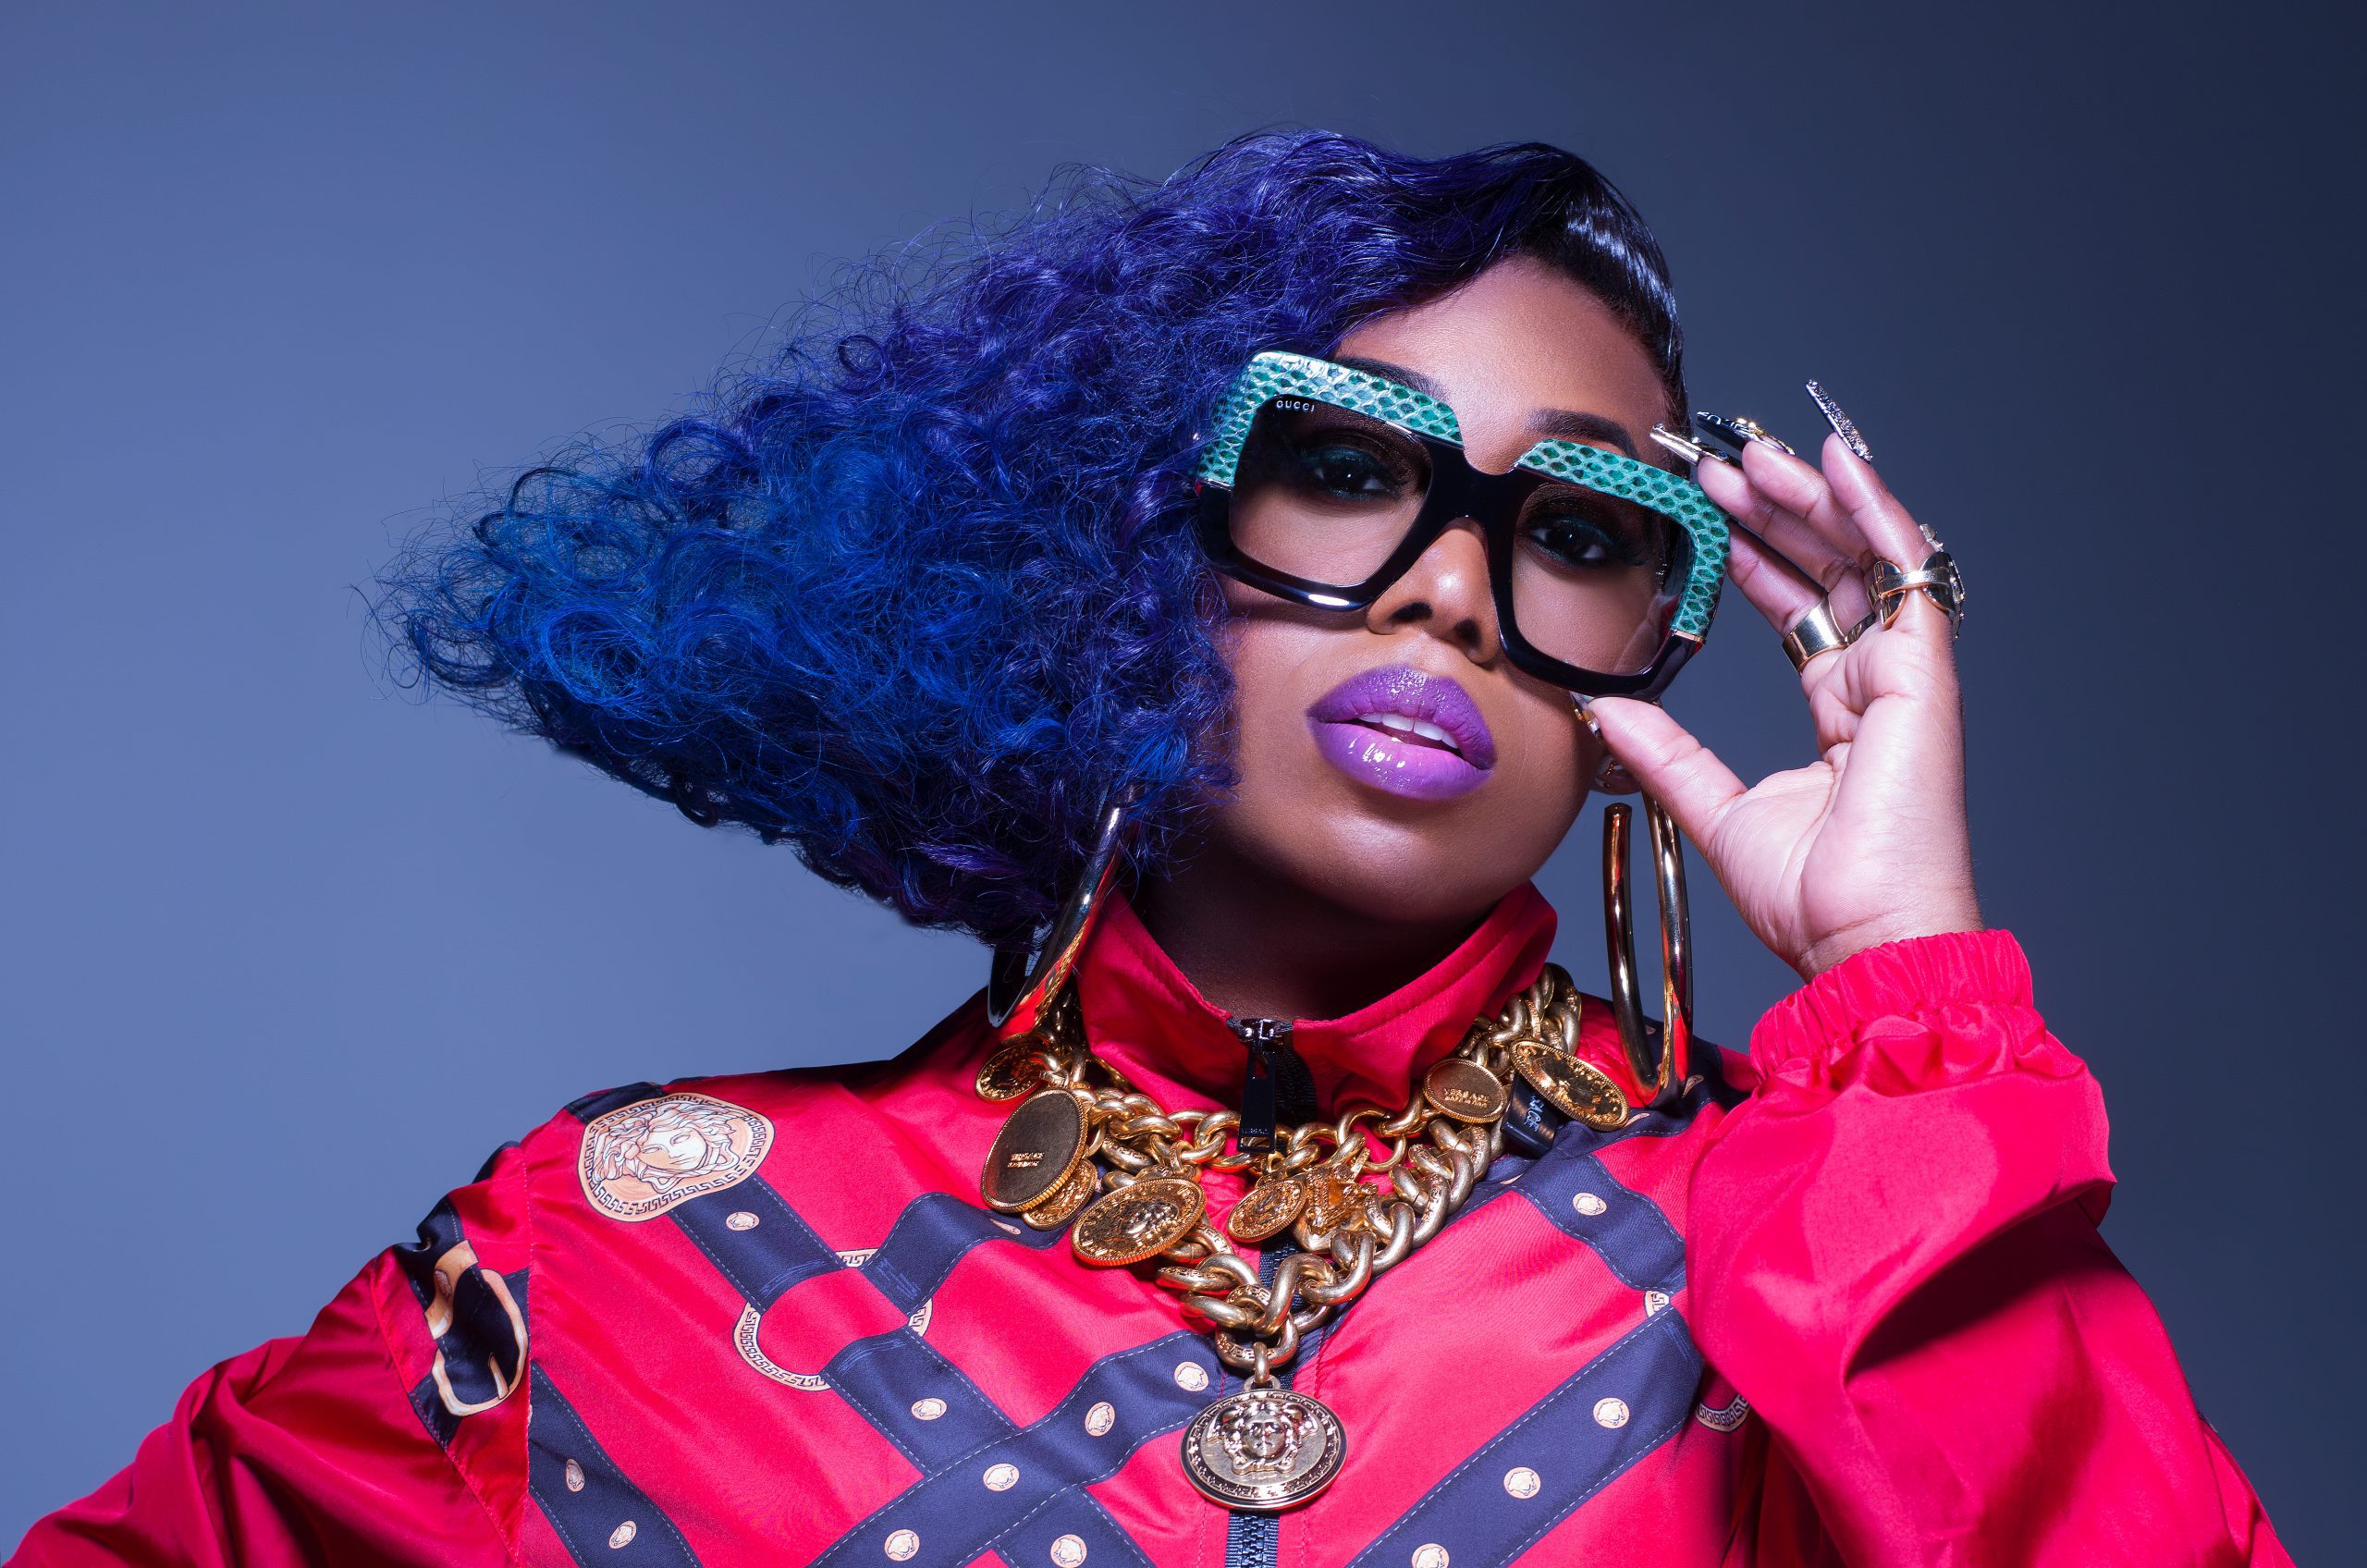 Missy Elliott Partner And Family: Who Are They?